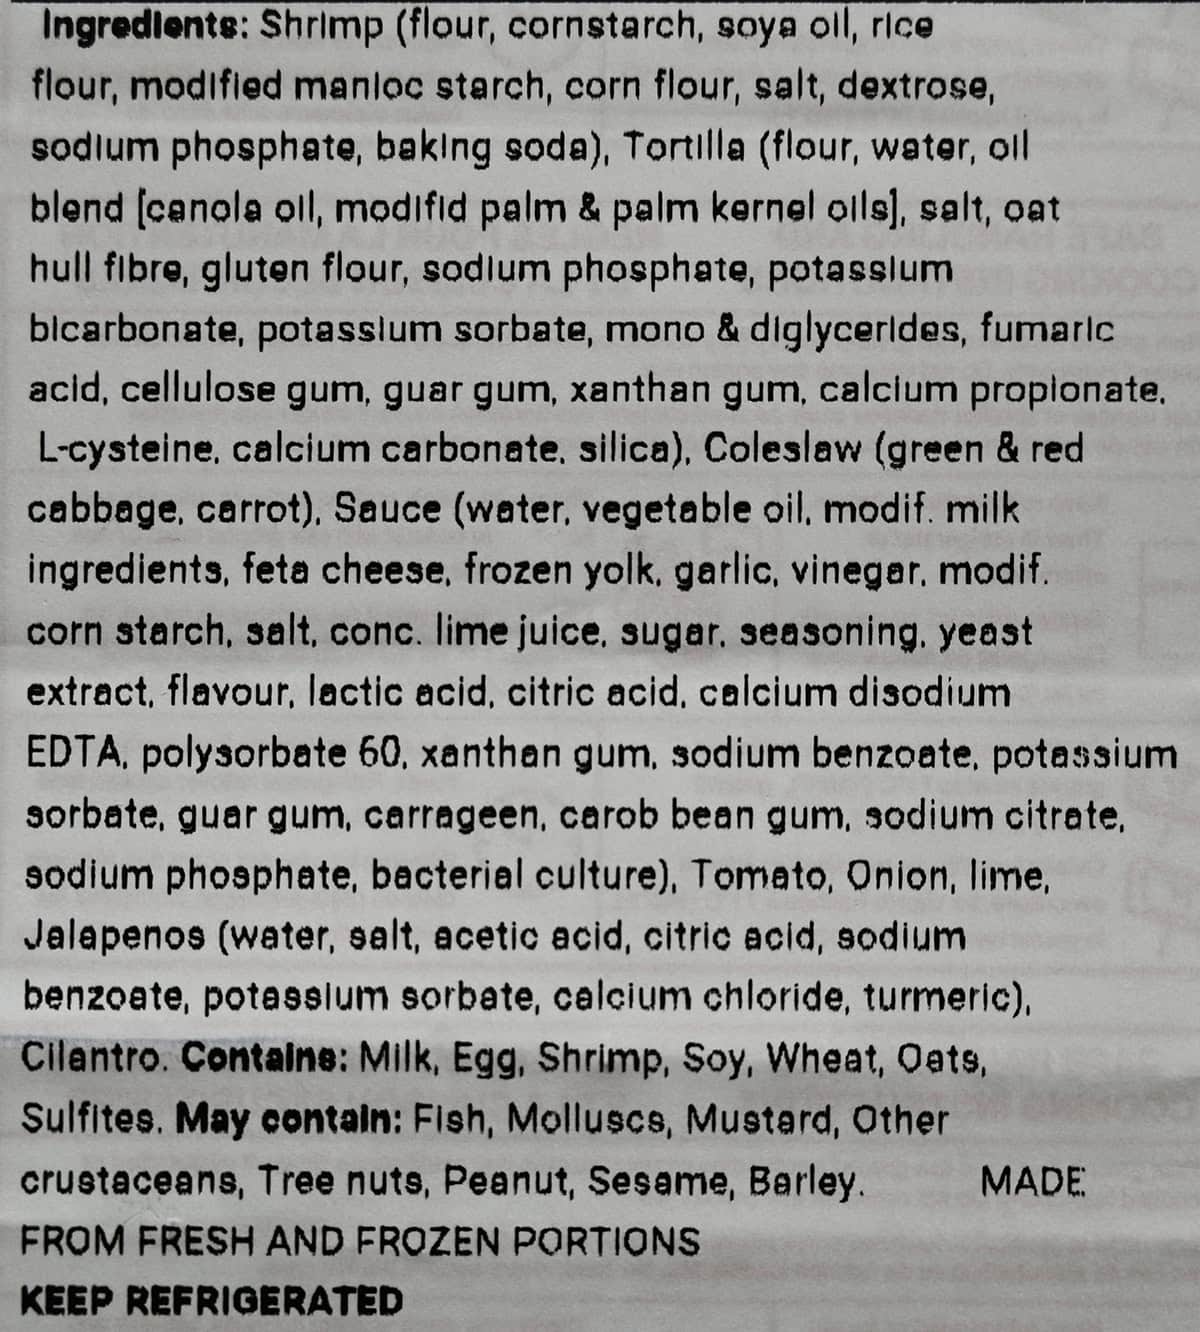 Image of the ingredients list for the tacos from packaging.